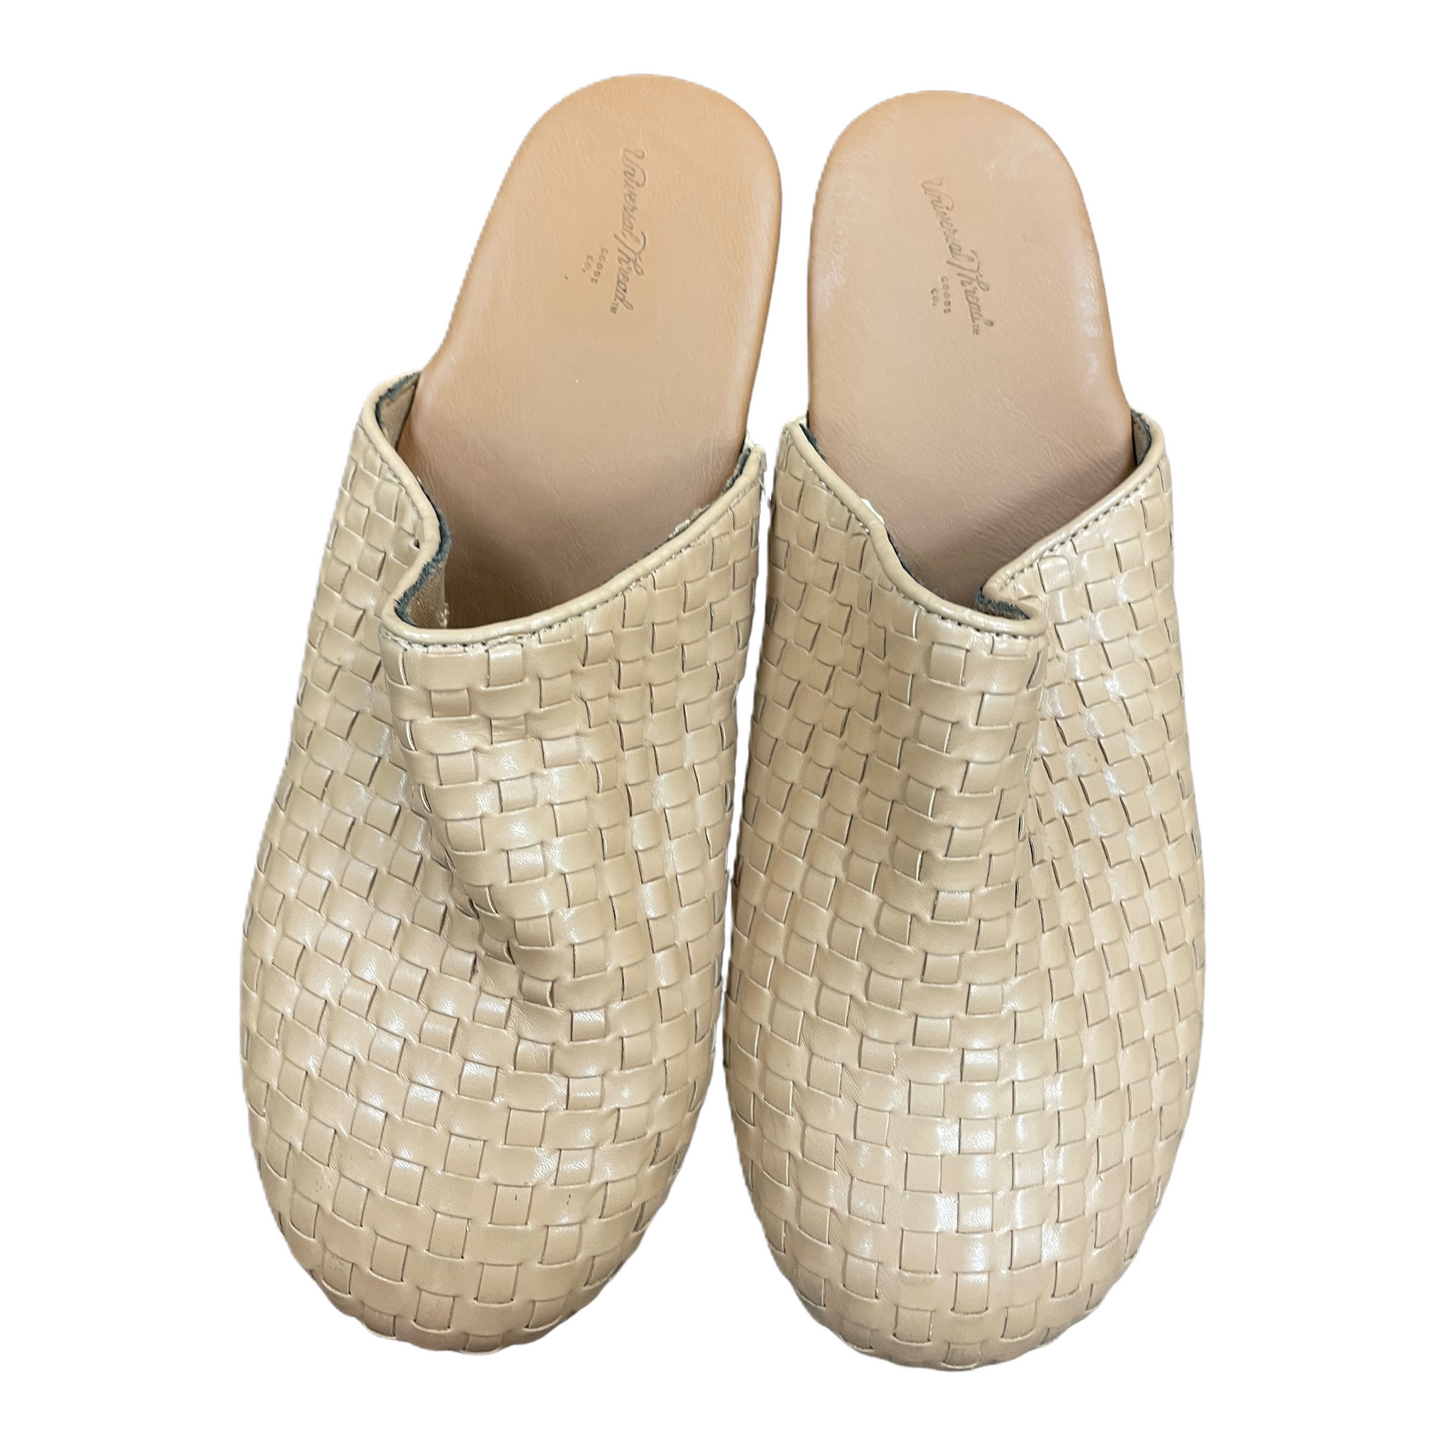 Tan Shoes Heels Block By Universal Thread, Size: 9.5